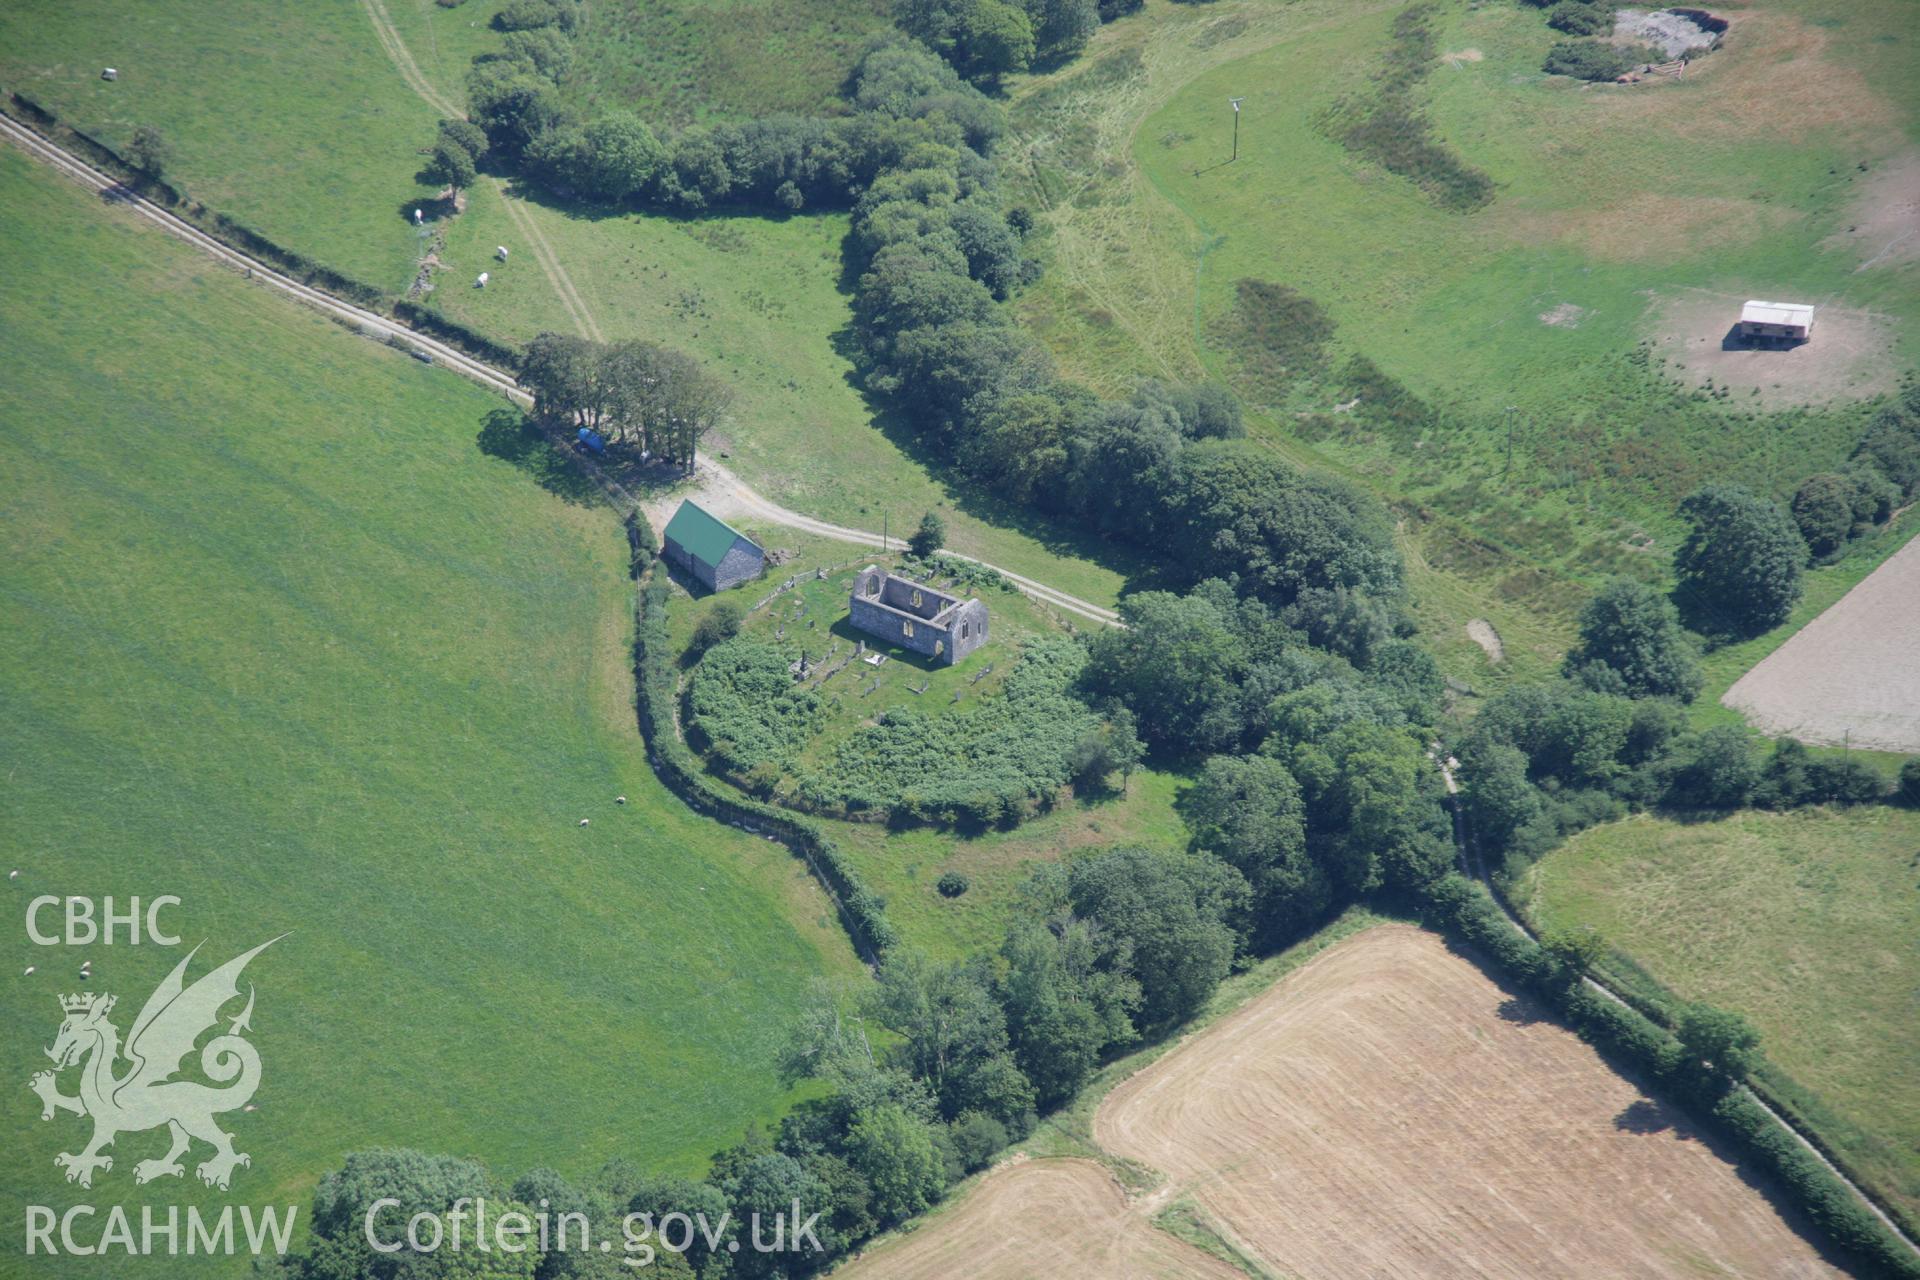 RCAHMW colour oblique aerial photograph of St Michael's Church, Rhostie. Taken on 17 July 2006 by Toby Driver.